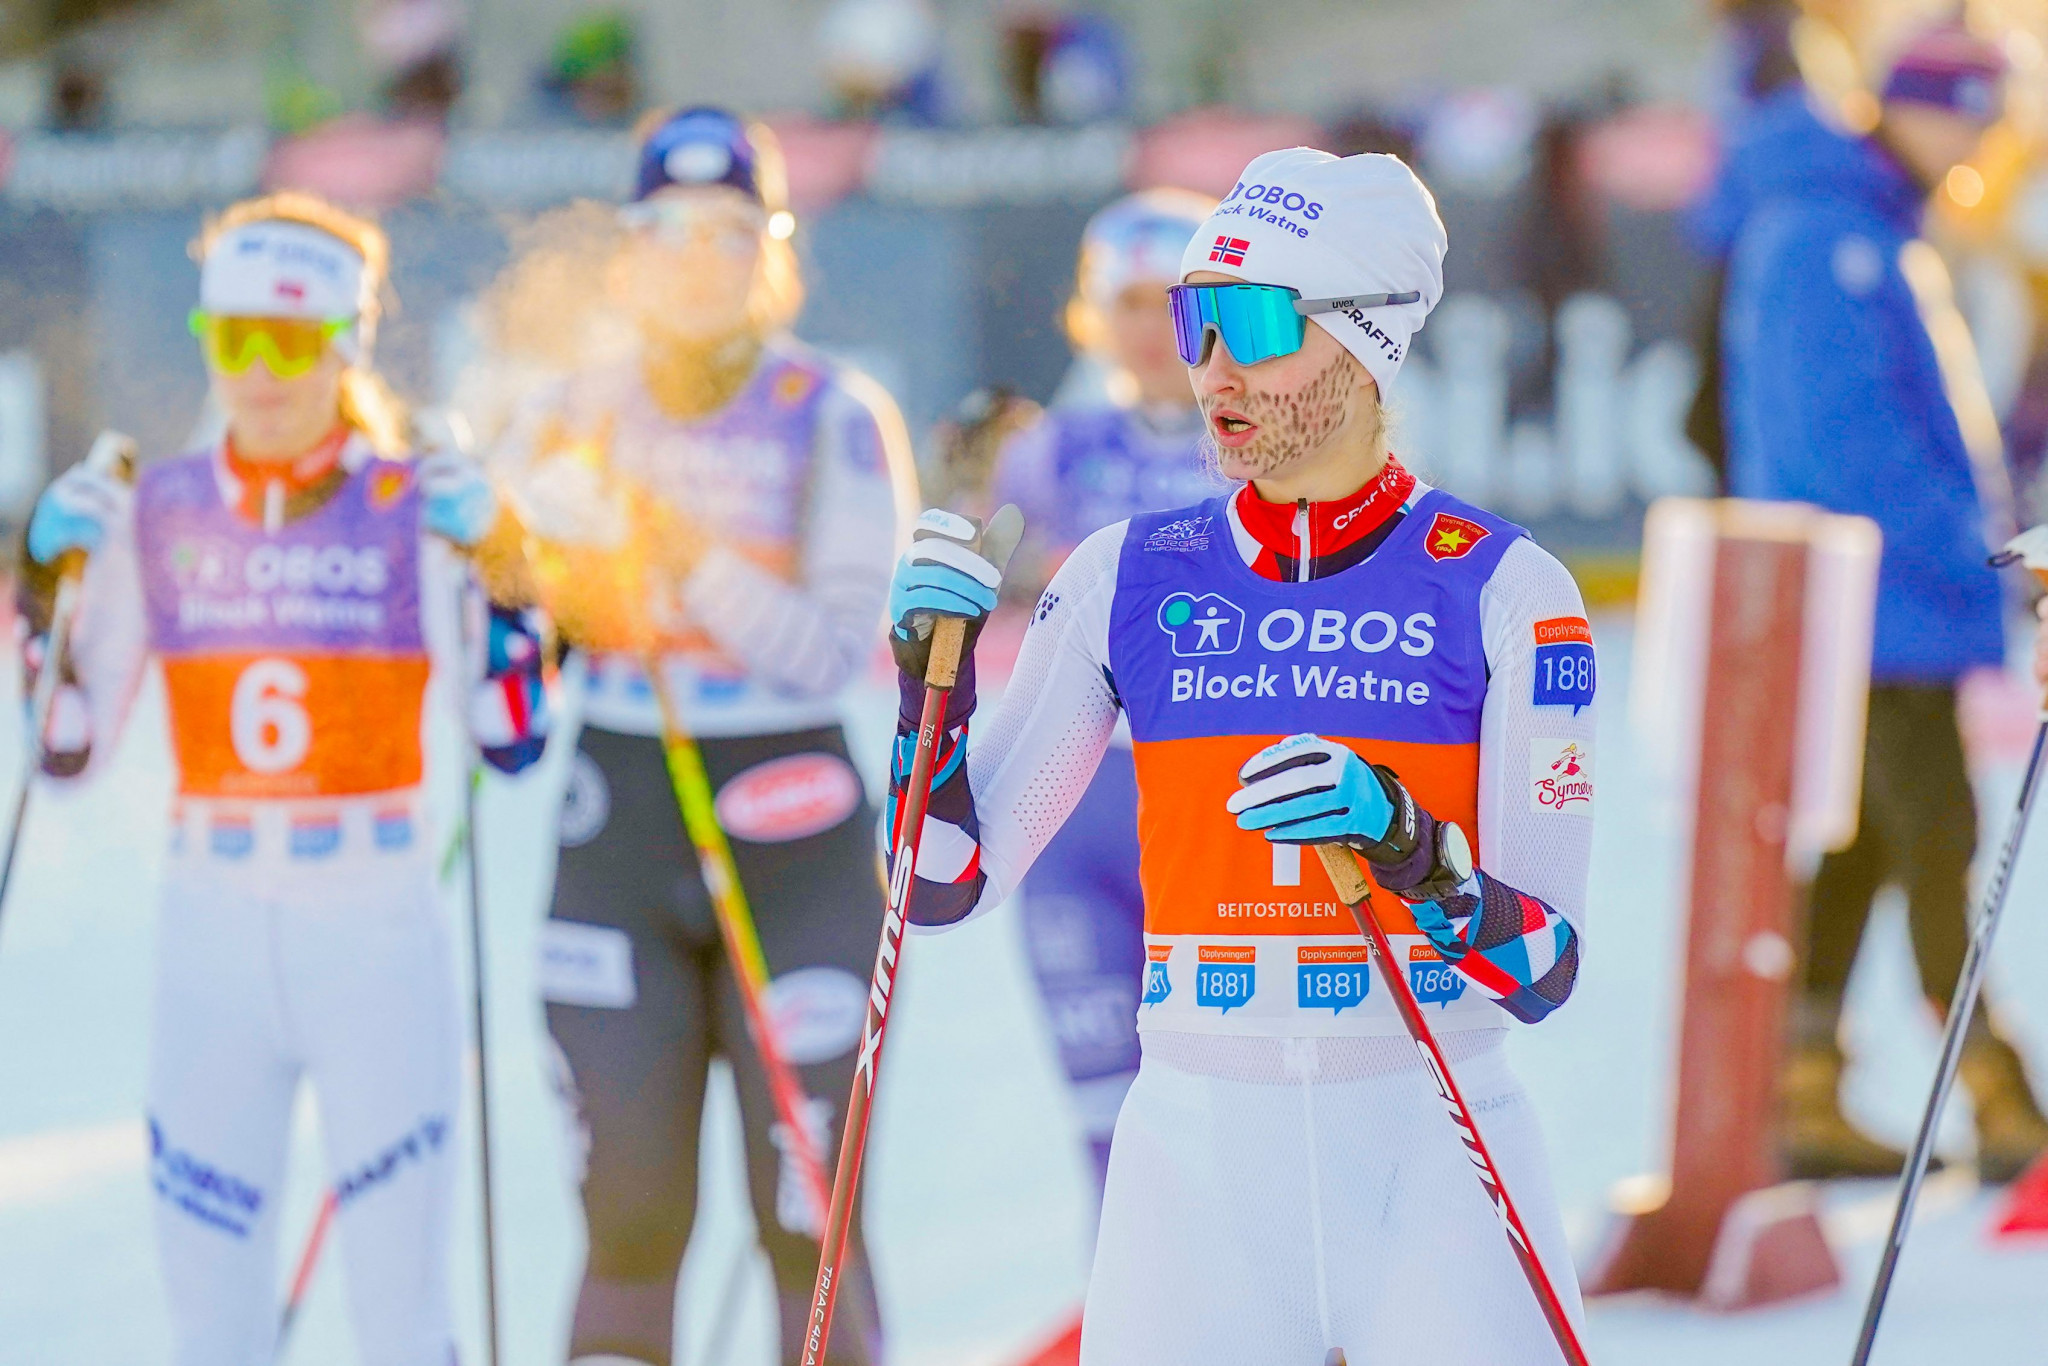 Gyda Westvold Hansen drew a beard on her face during a women's Nordic combined race in Norway as part of a protest at the absence of the women's event from Milan Cortina 2026 ©Getty Images